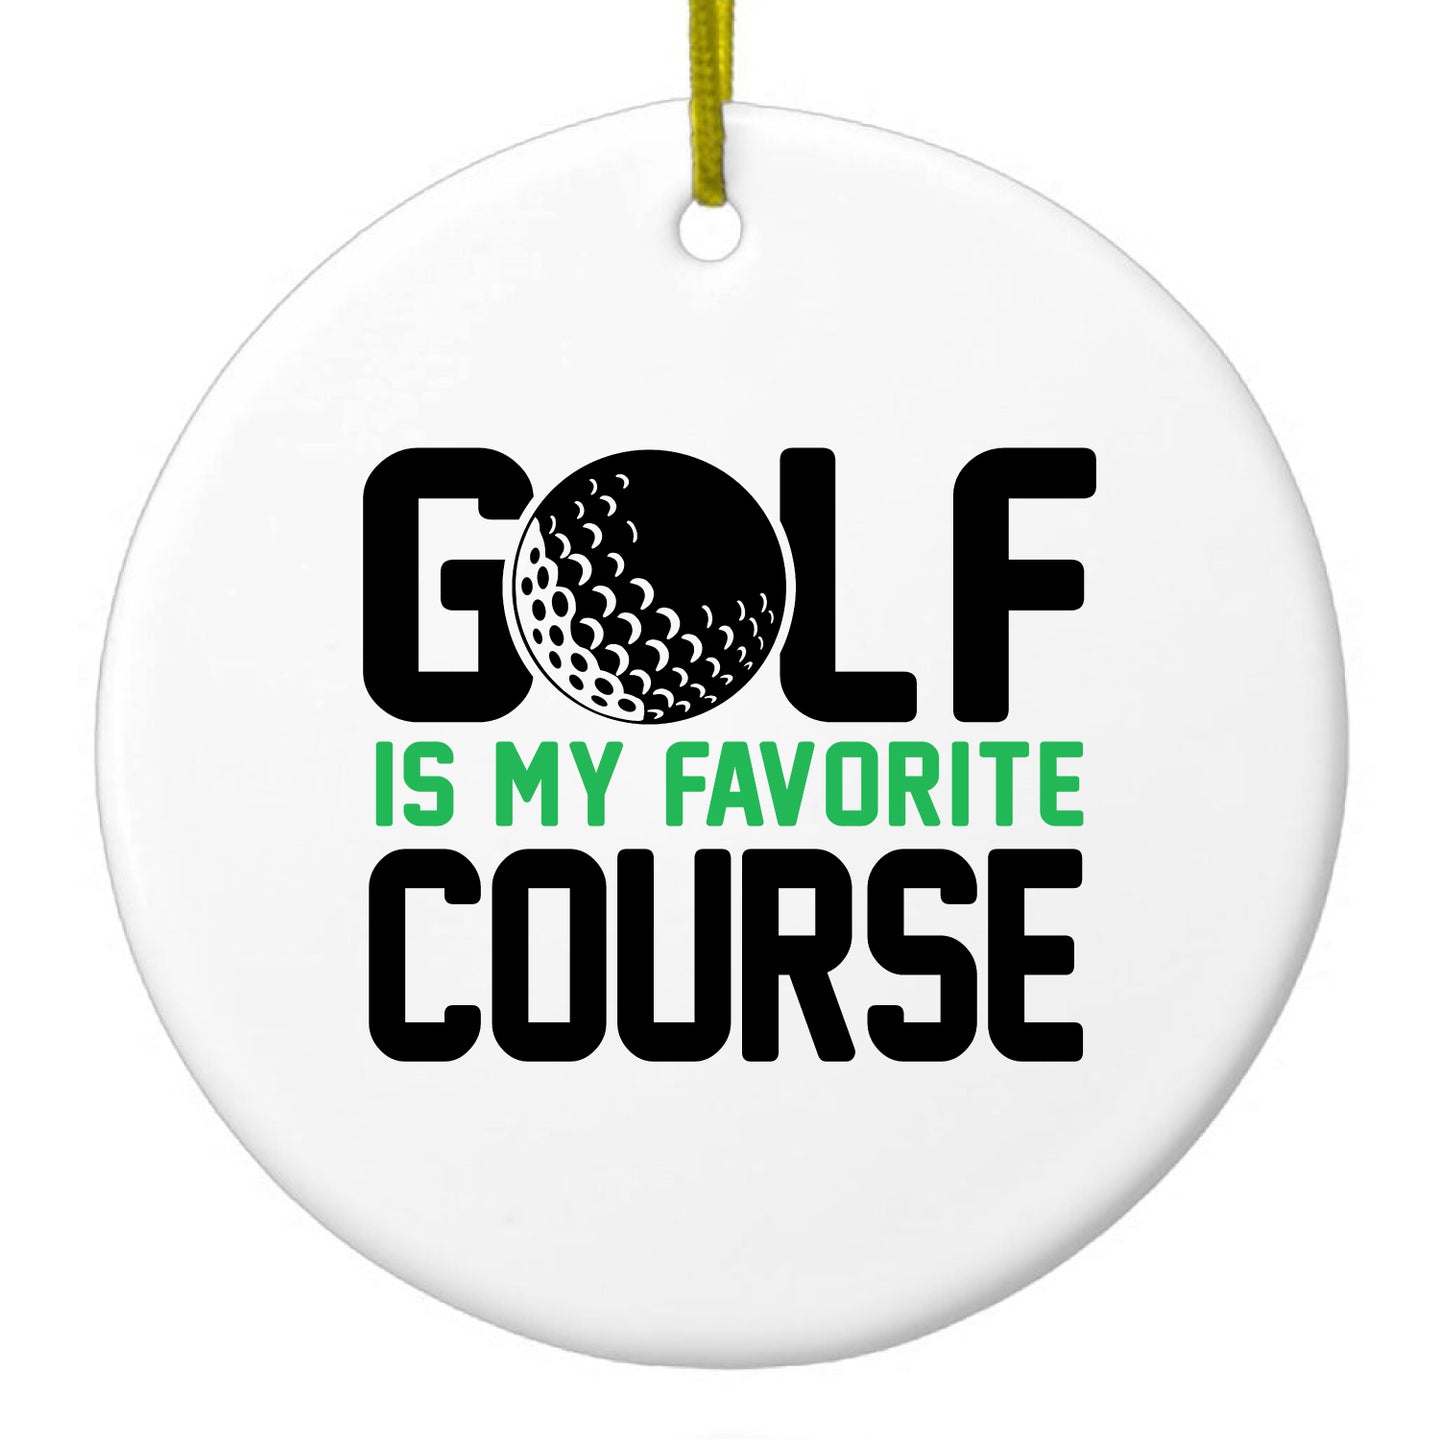 DistinctInk® Hanging Ceramic Christmas Tree Ornament with Gold String - Great Gift / Present - 2 3/4 inch Diameter - Golf Is MY Favorite Course